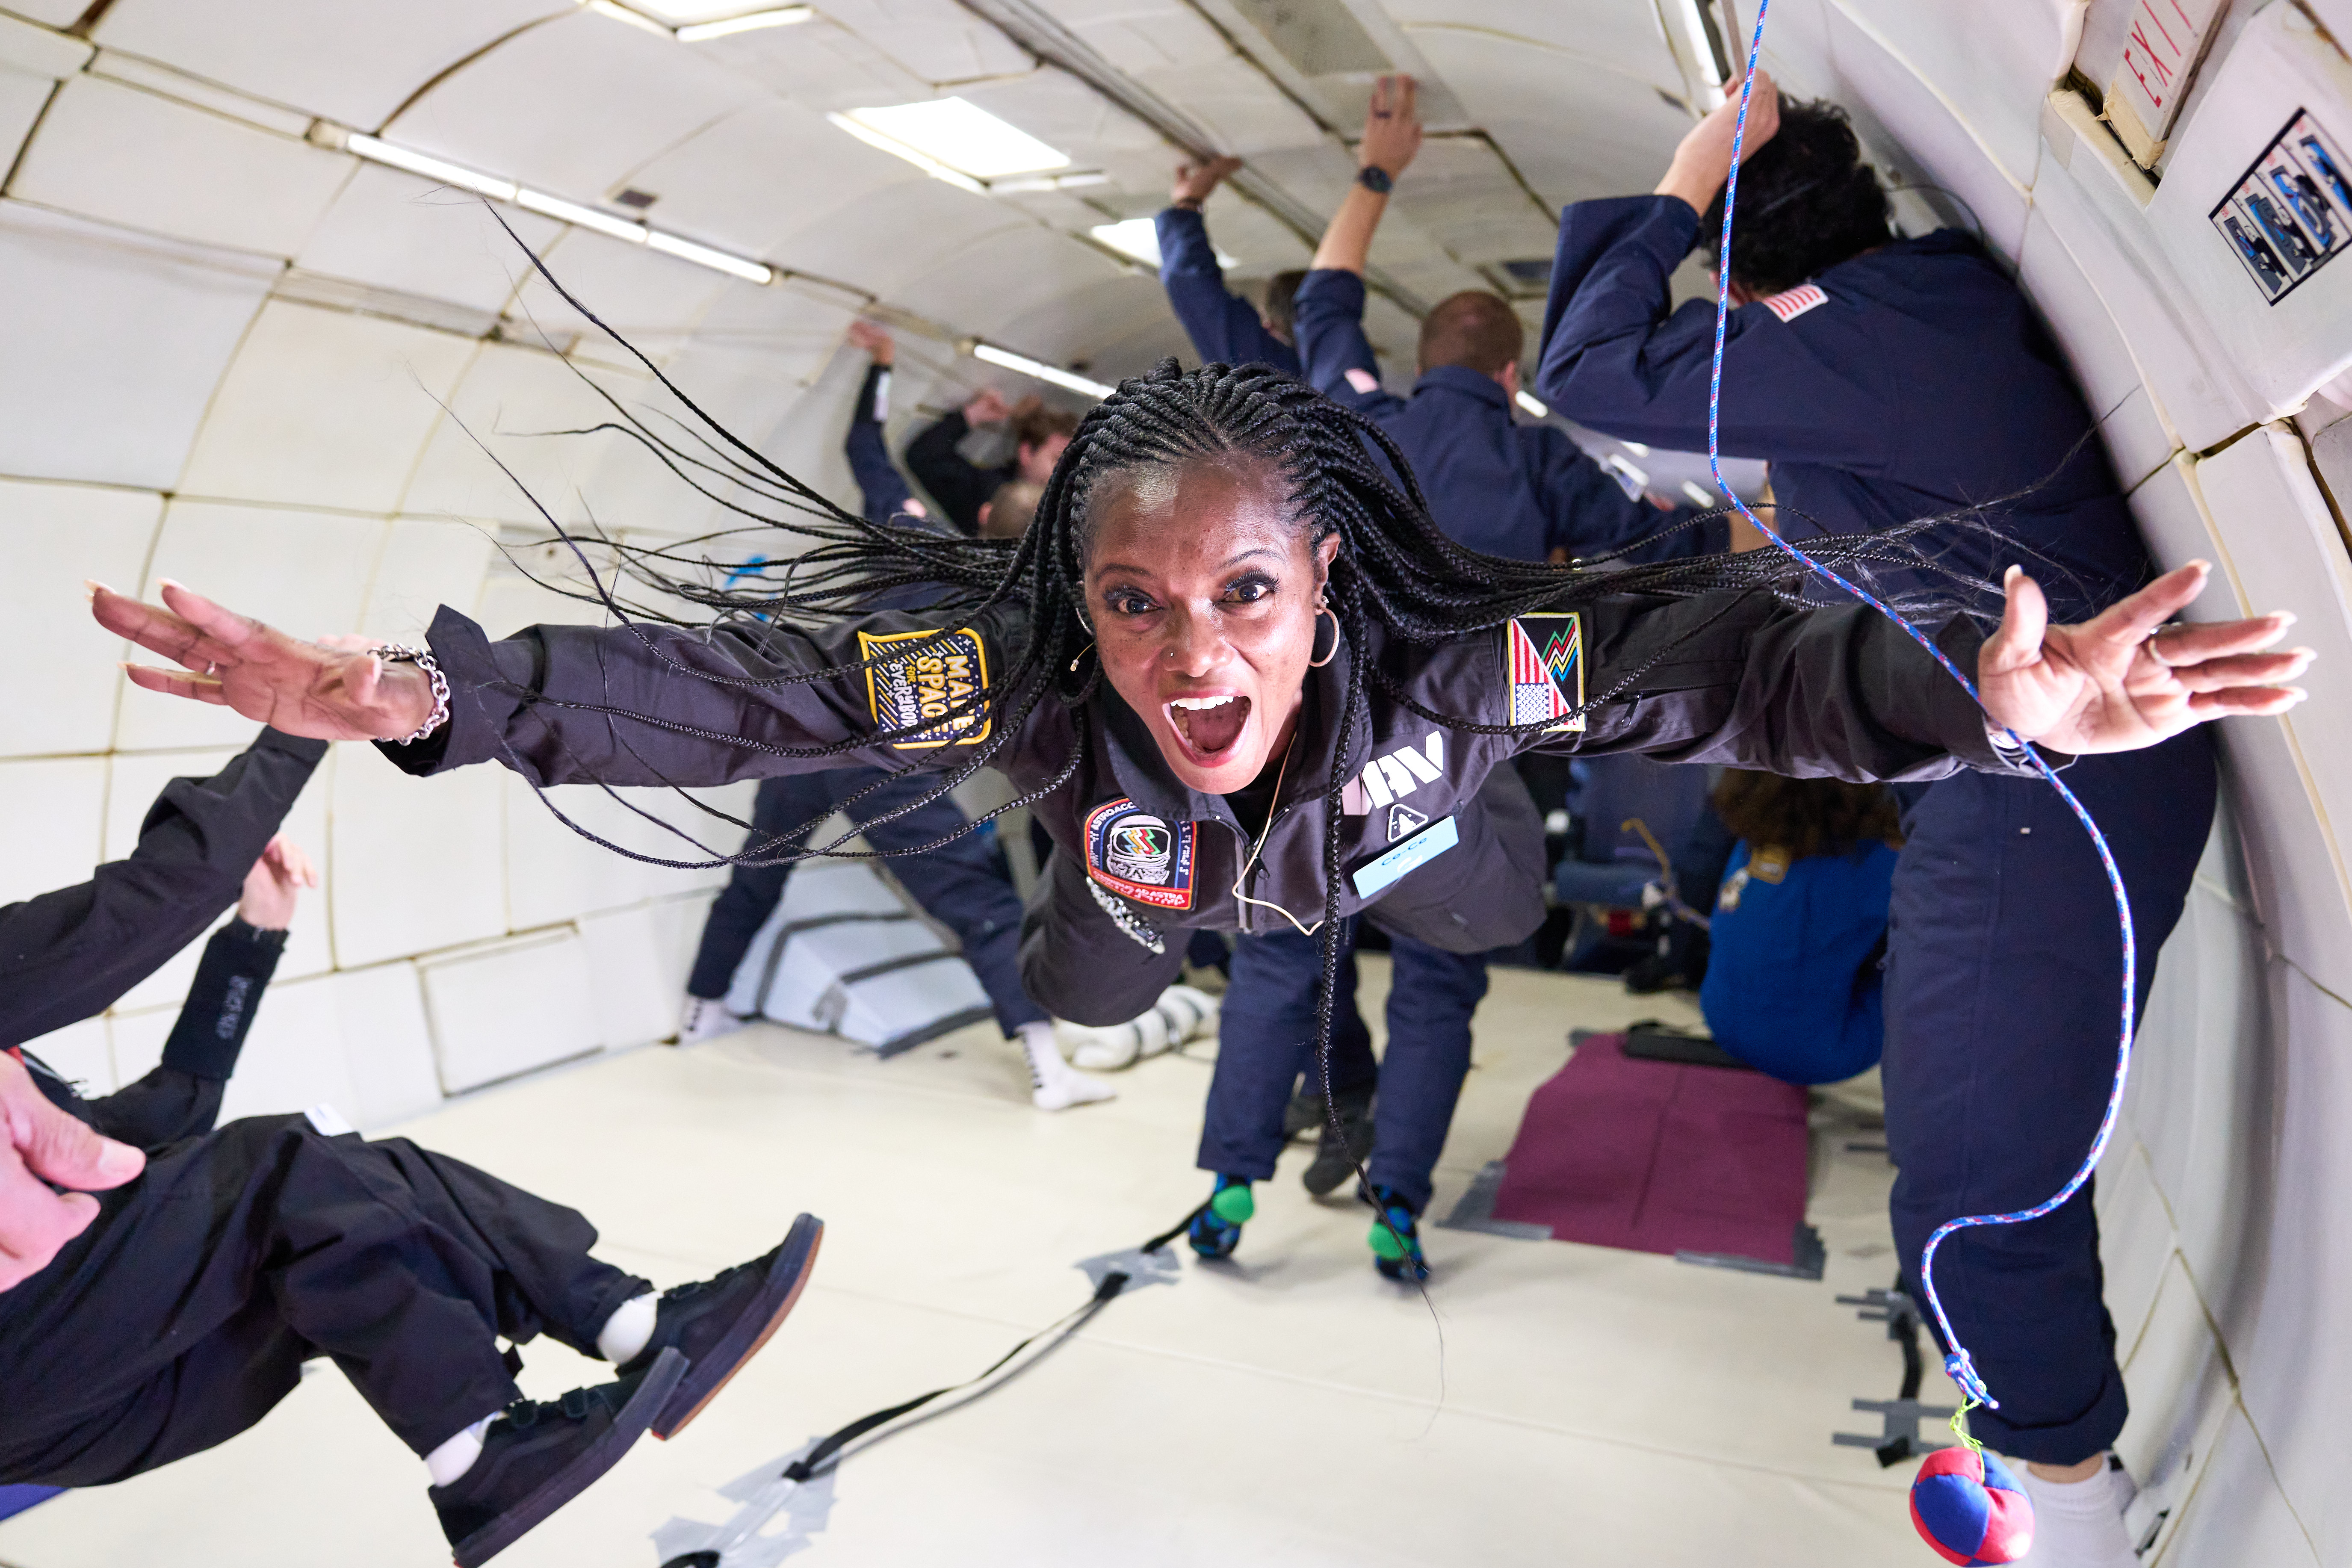 a person in a plane outstretches their arms during a moment of weightlessness induced by a parabola